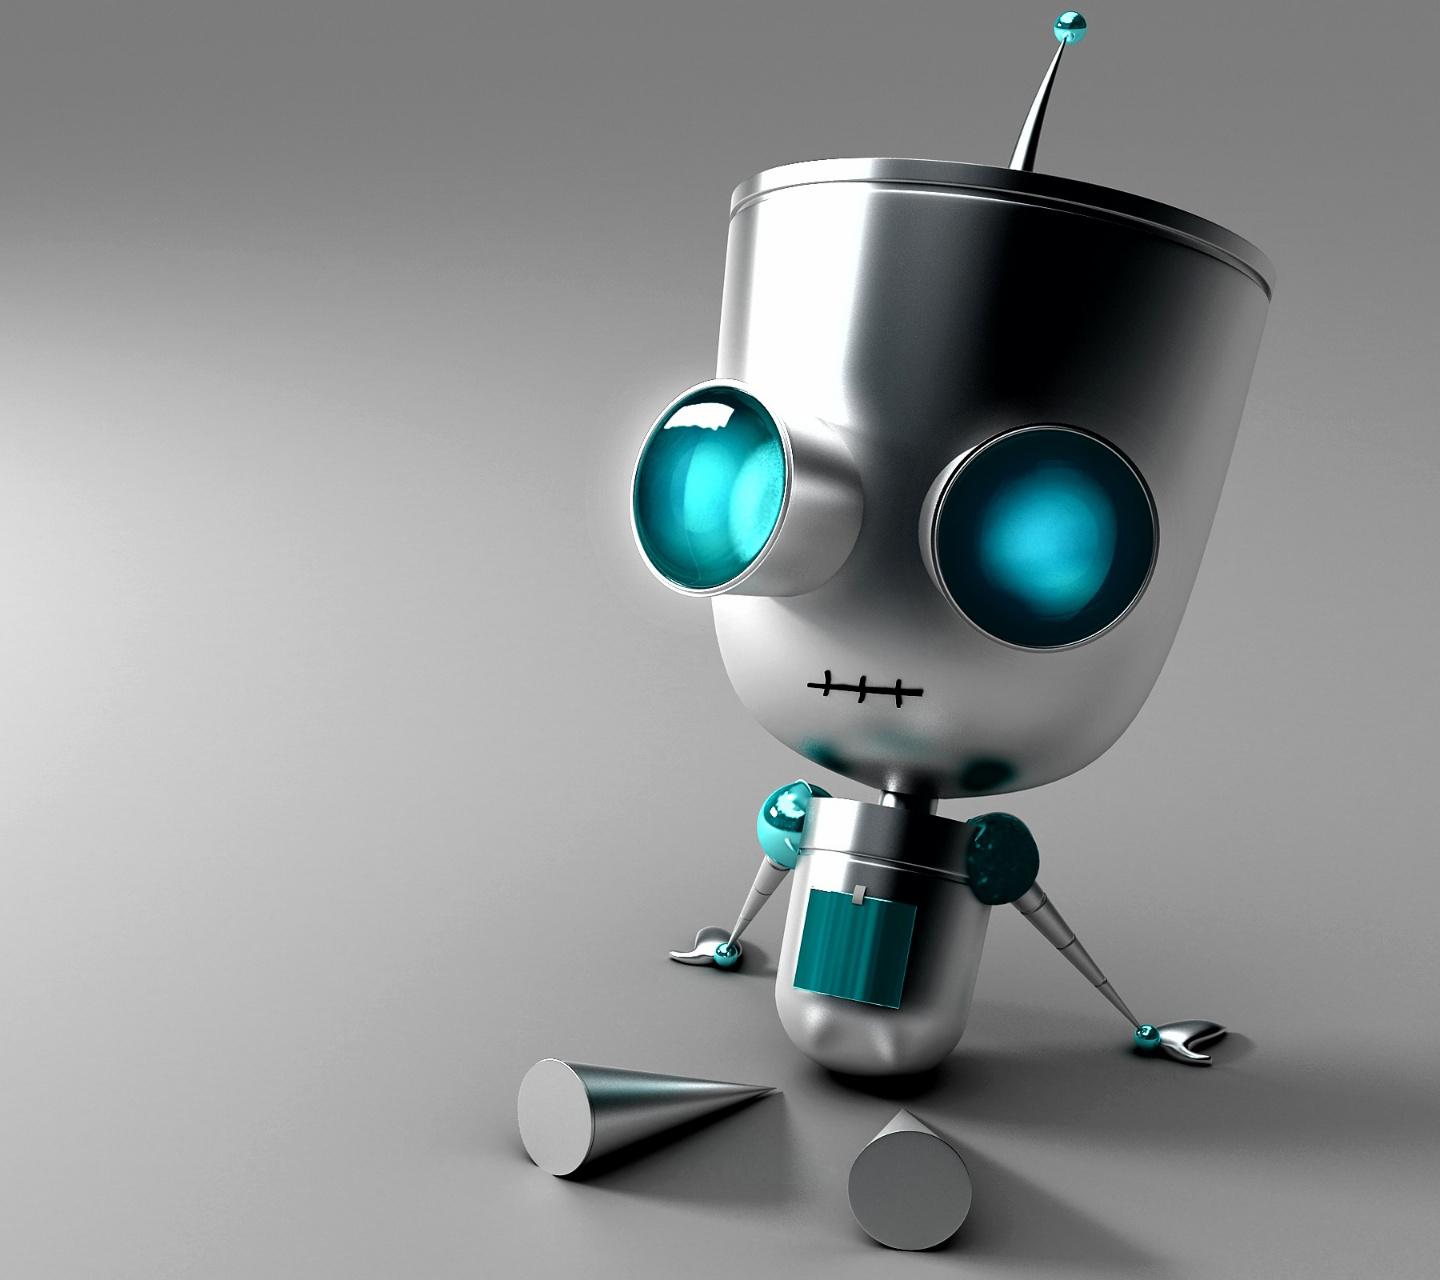 Cute Robot High Quality And Resolution Wallpaper On